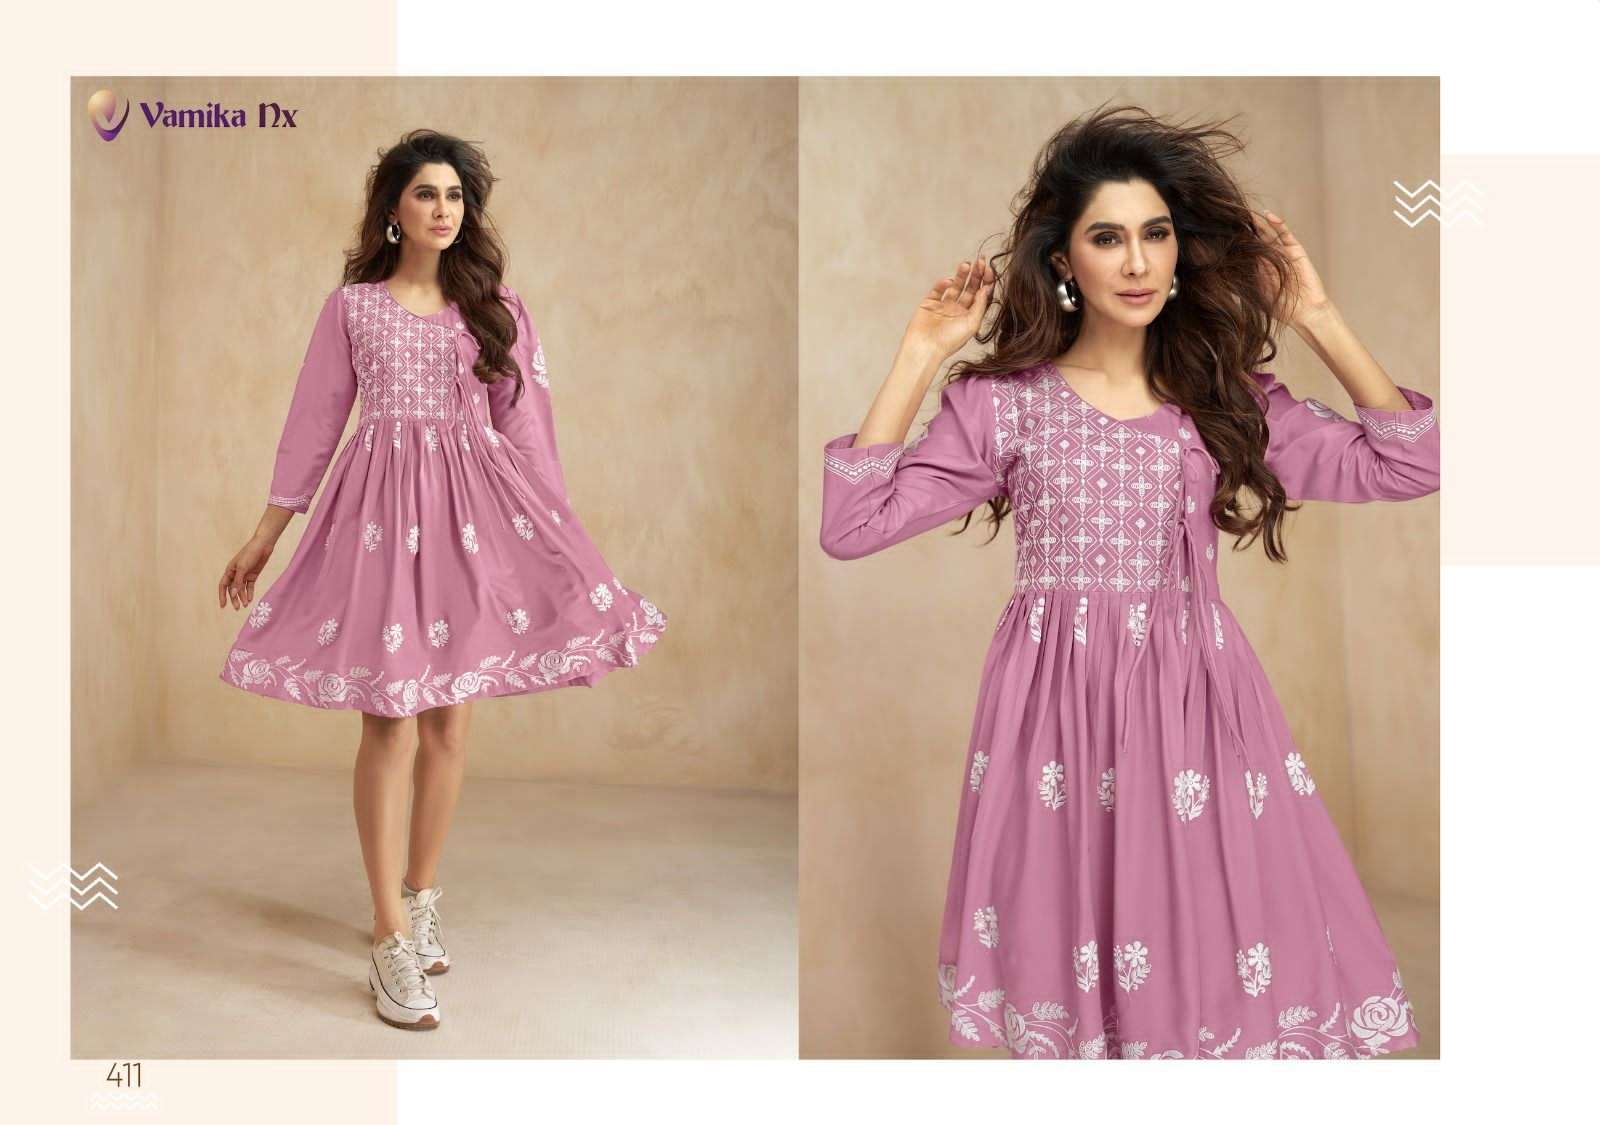 Vamika%20Fashion%20Ibadat%20Rayon%20with%20fancy%20TUnic%20Style%20Kurti%20collection%20at%20best%20rate%20(6) 5 2023 10 19 12 44 11